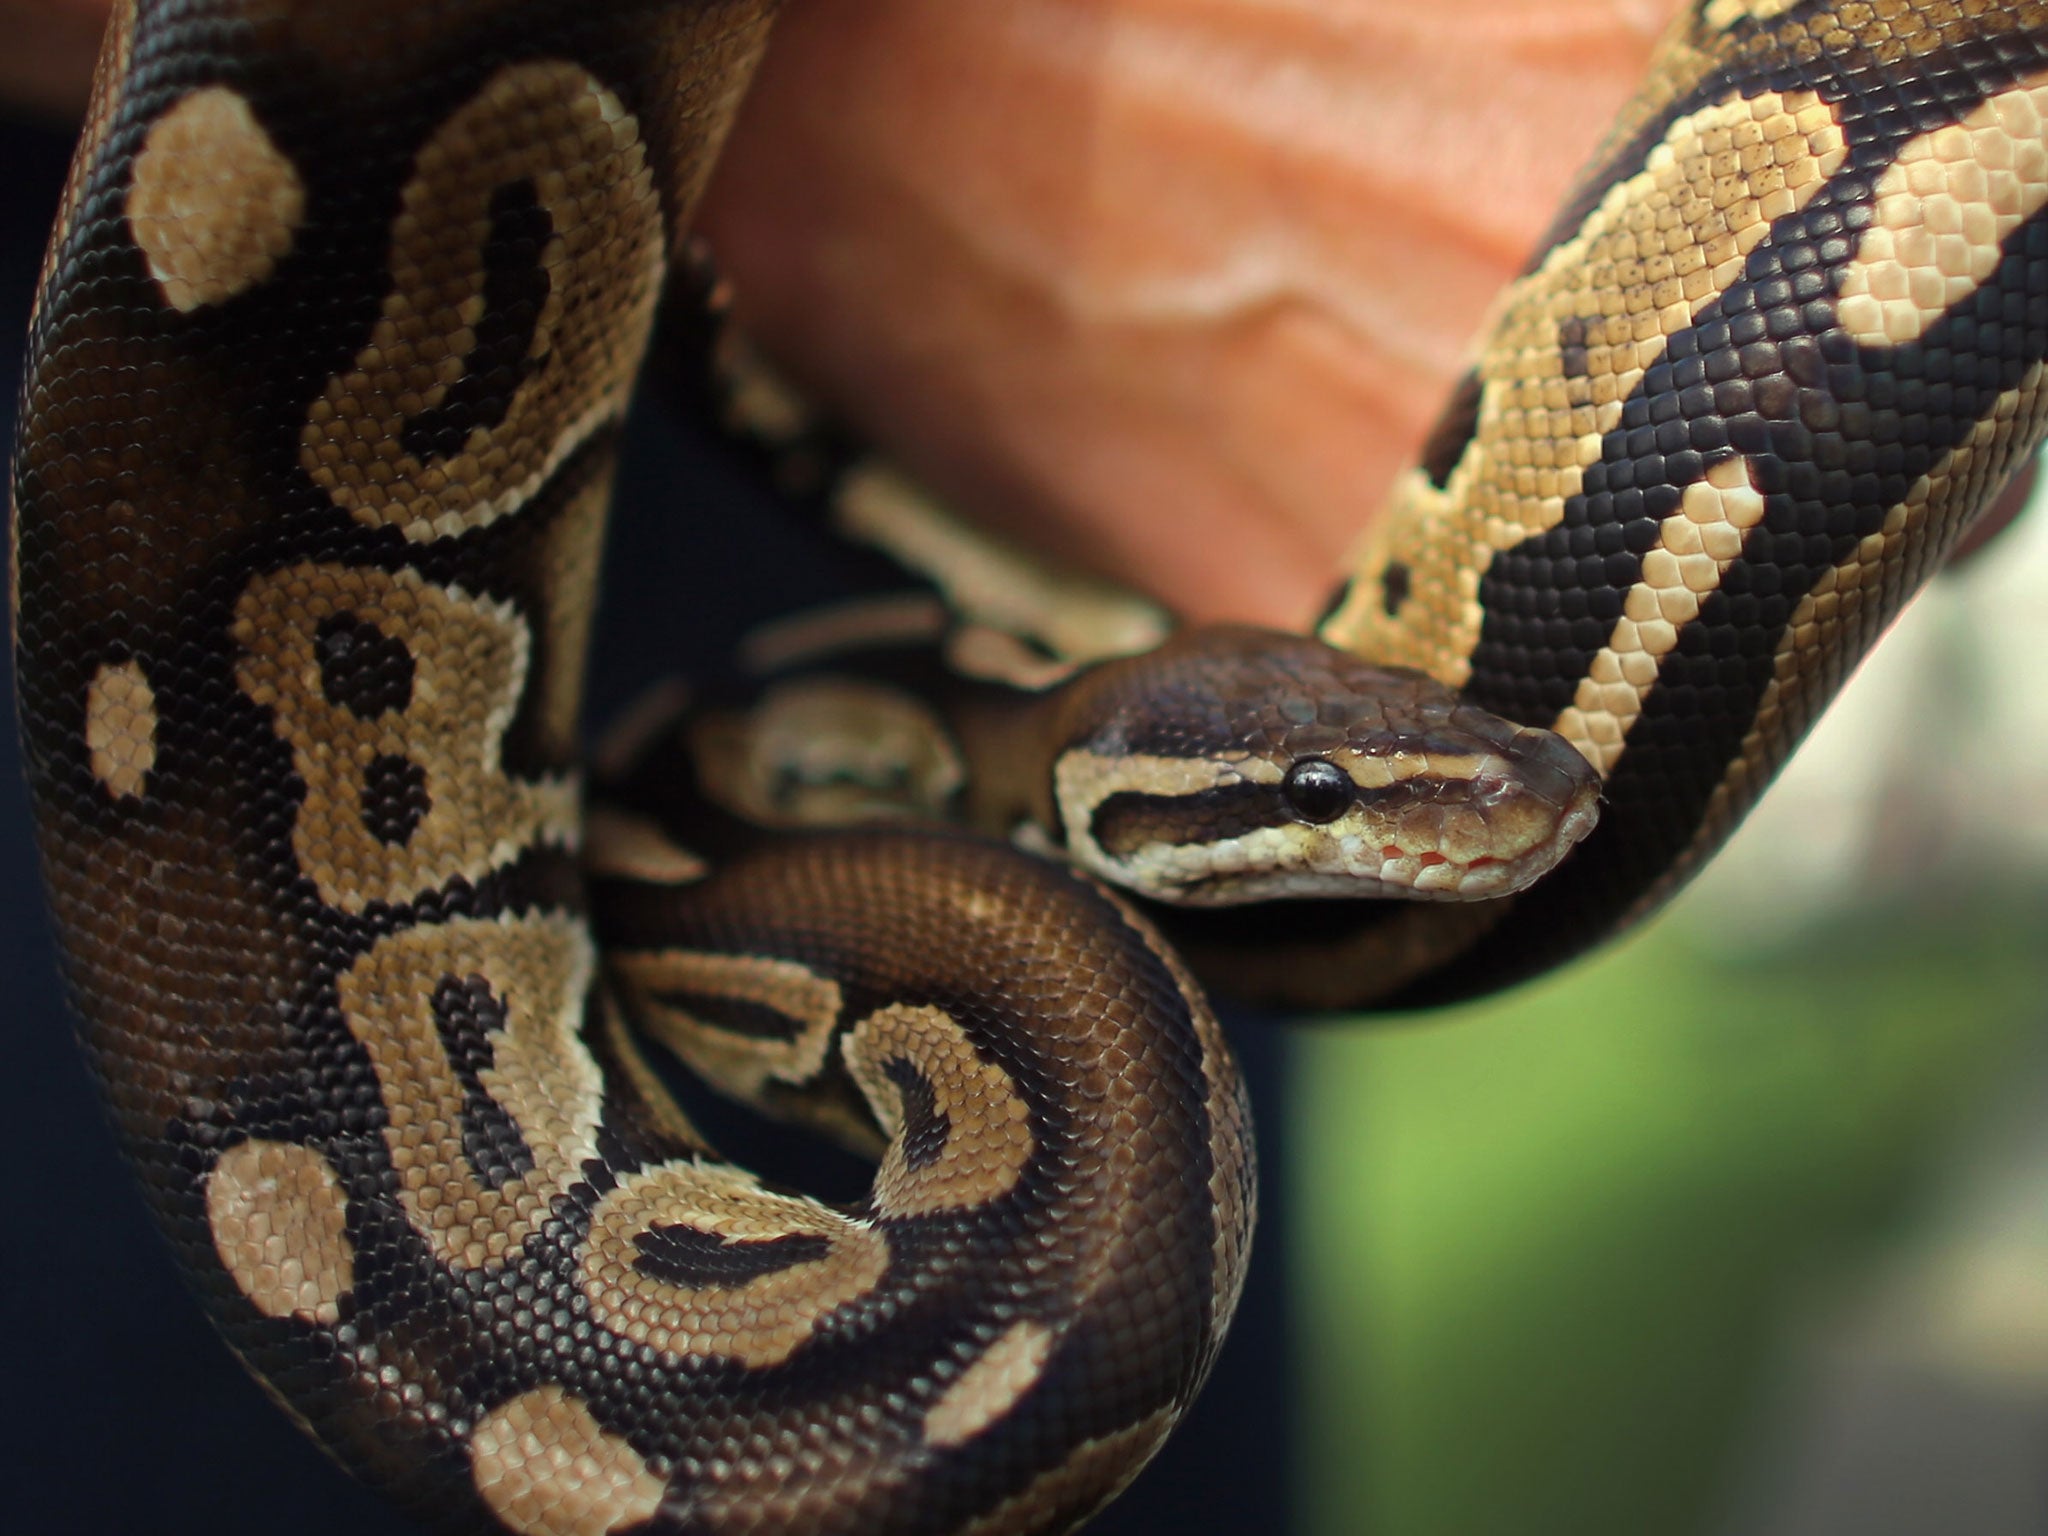 Canadian animal welfare officers have rescued 40 distressed pythons (not pictured) from a motel room where they were being improperly held in plastic storage bins.